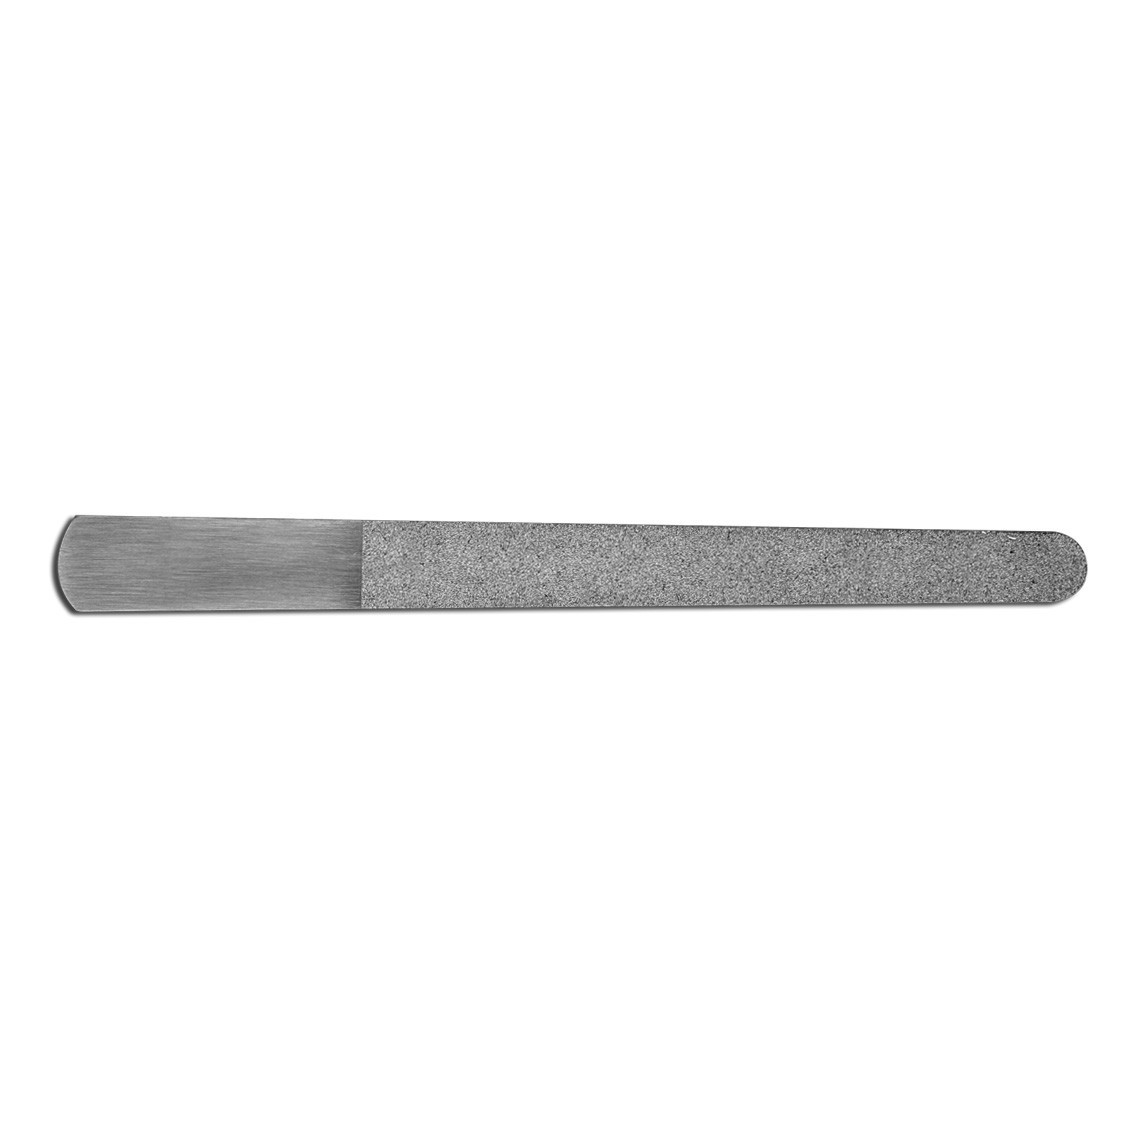 Professional diamond file with stainless steel handle 21 cm